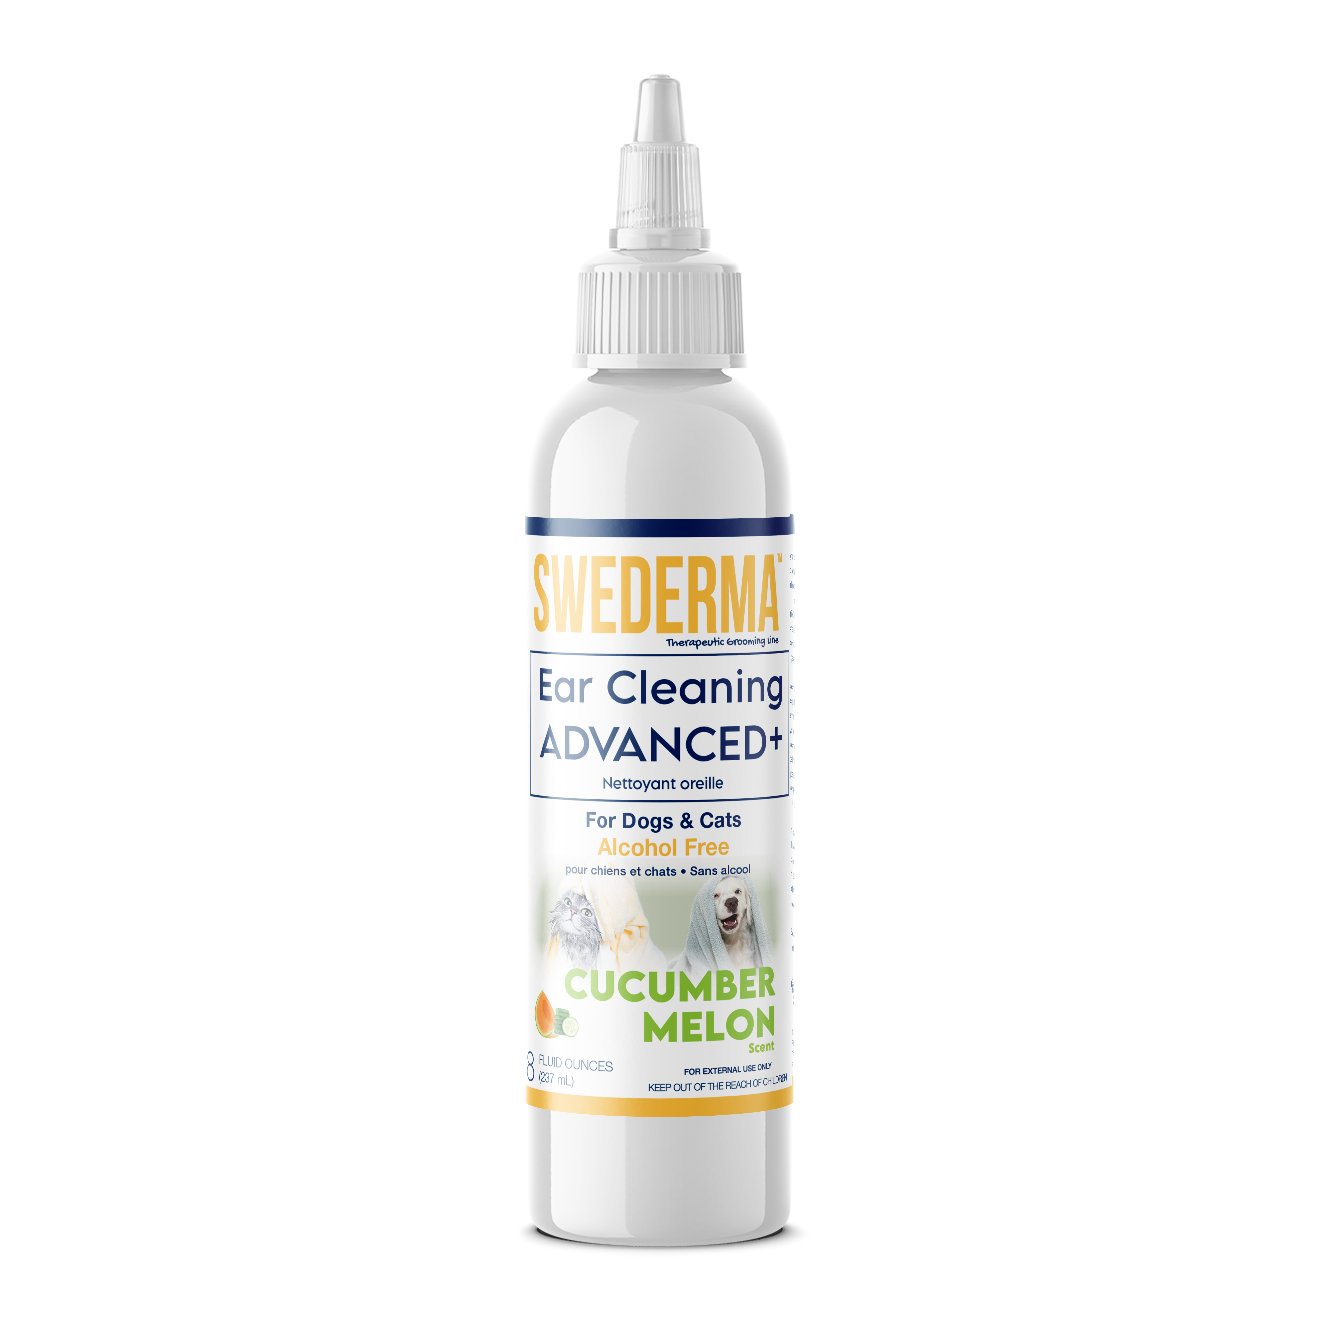 Swederma™ Ear Cleaning ADVANCED+ - Swedencare United States